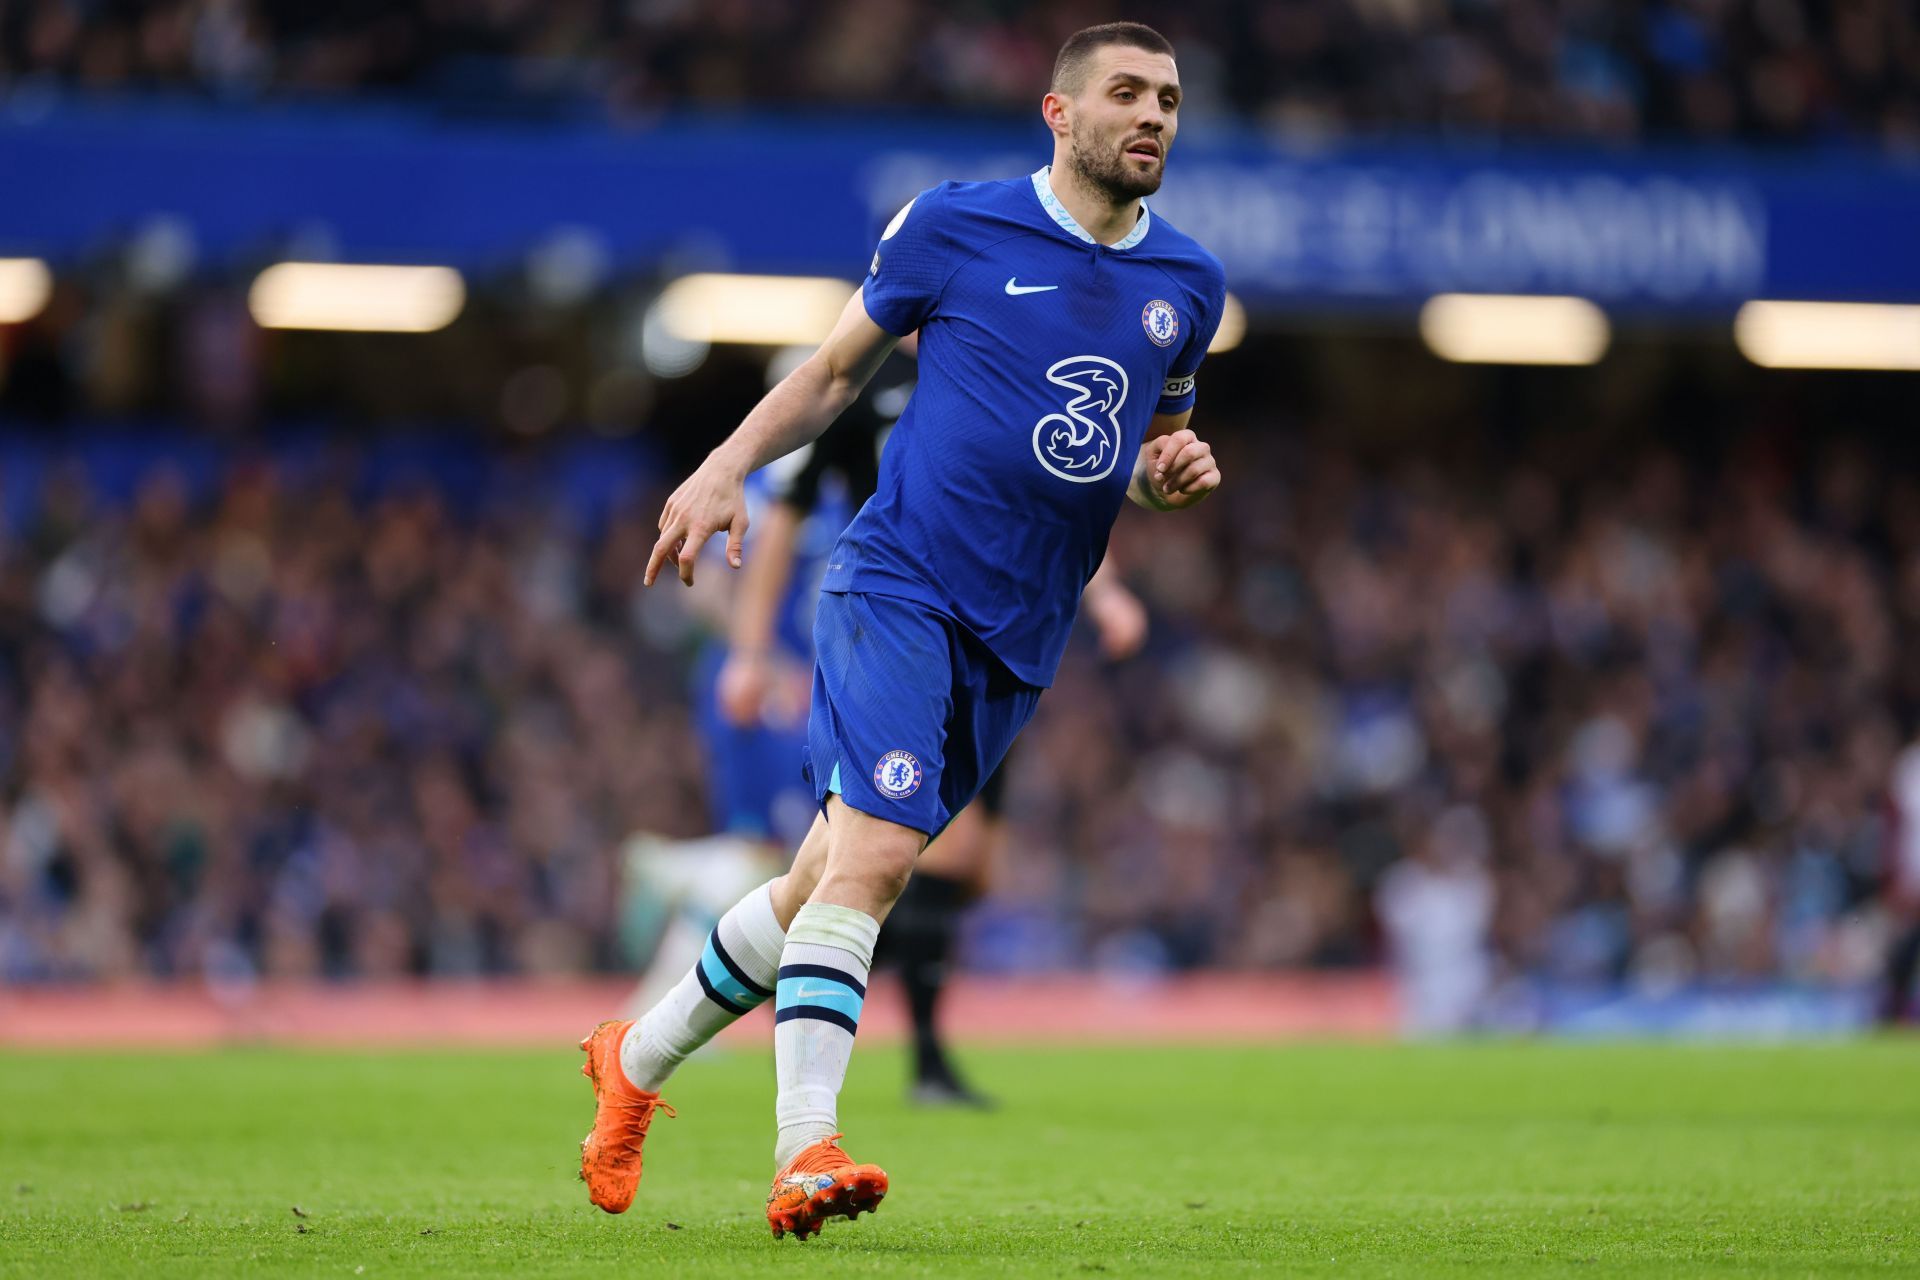 Kovacic looks set to leave Chelsea this summer.